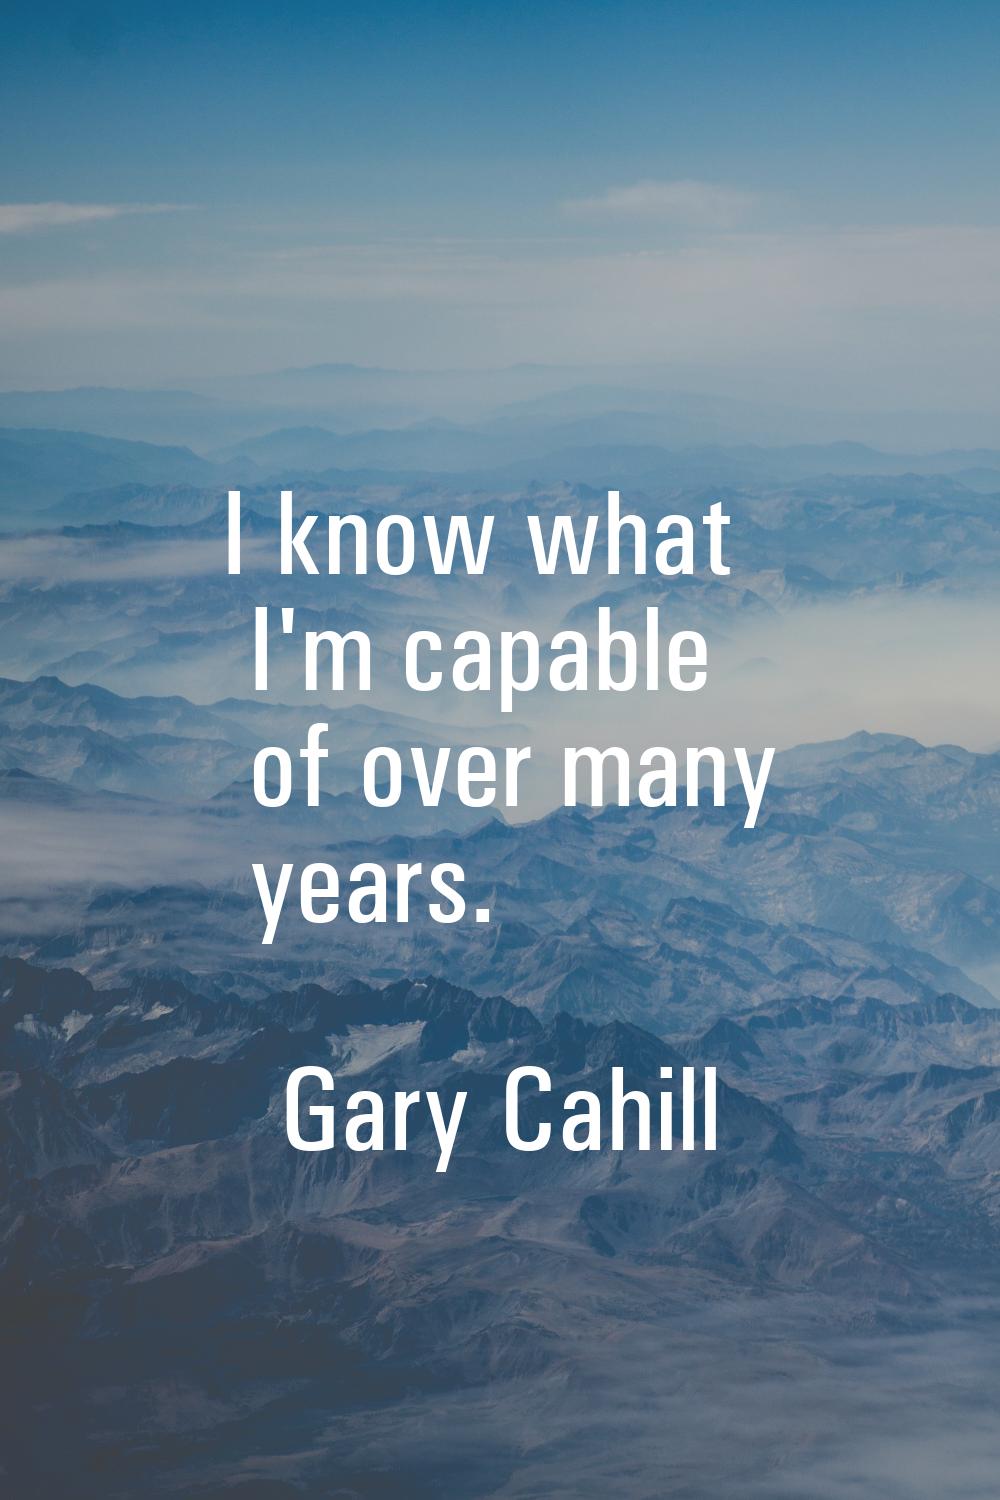 I know what I'm capable of over many years.